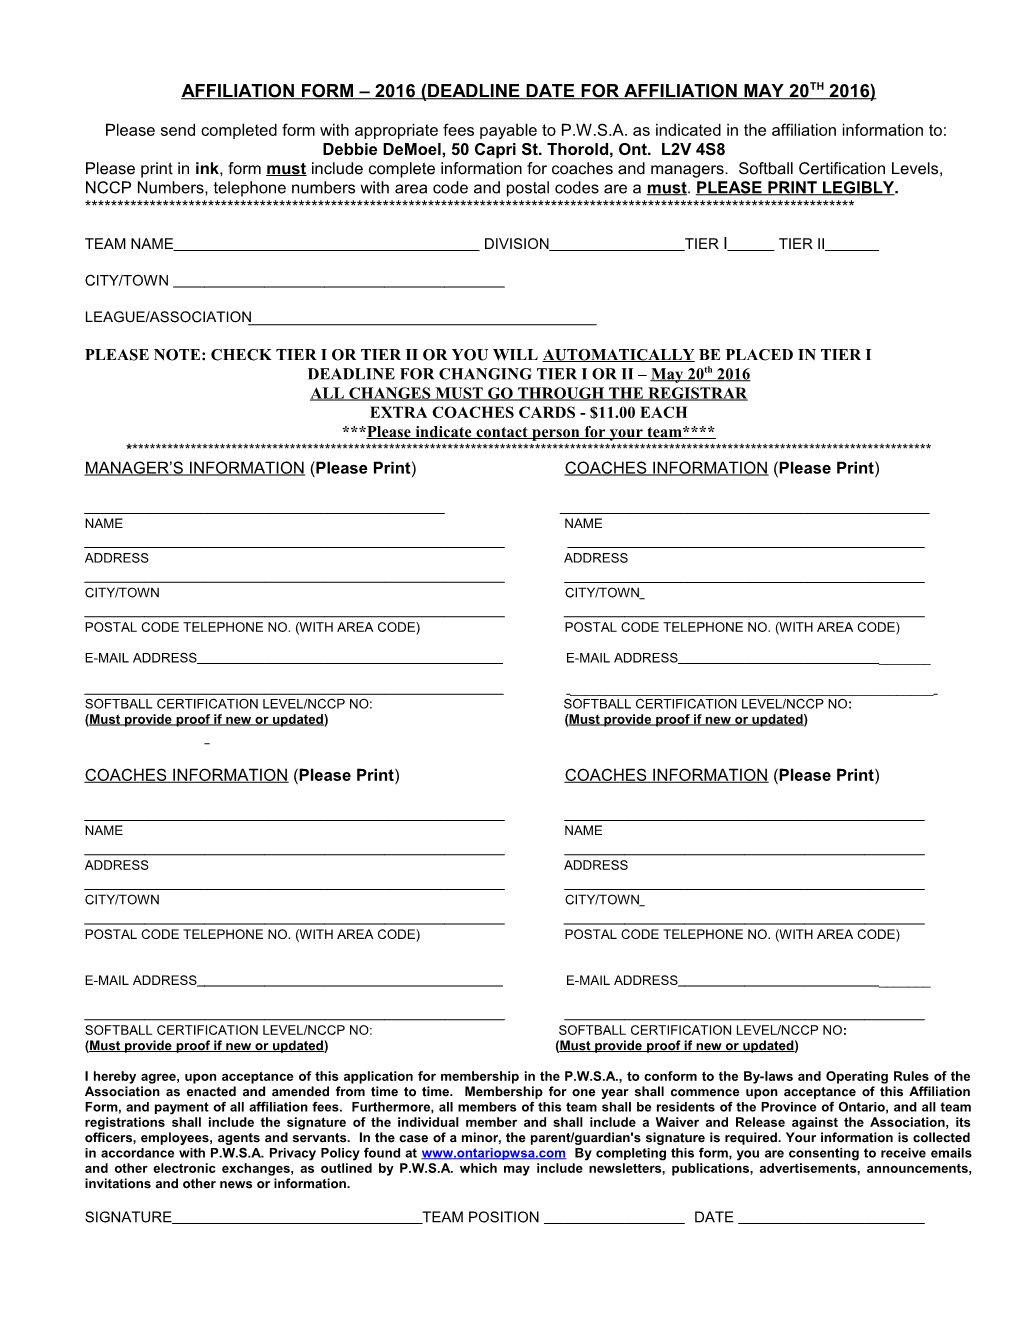 Affiliation Form 2016 (Deadline Date for Affiliation May 20Th 2016)